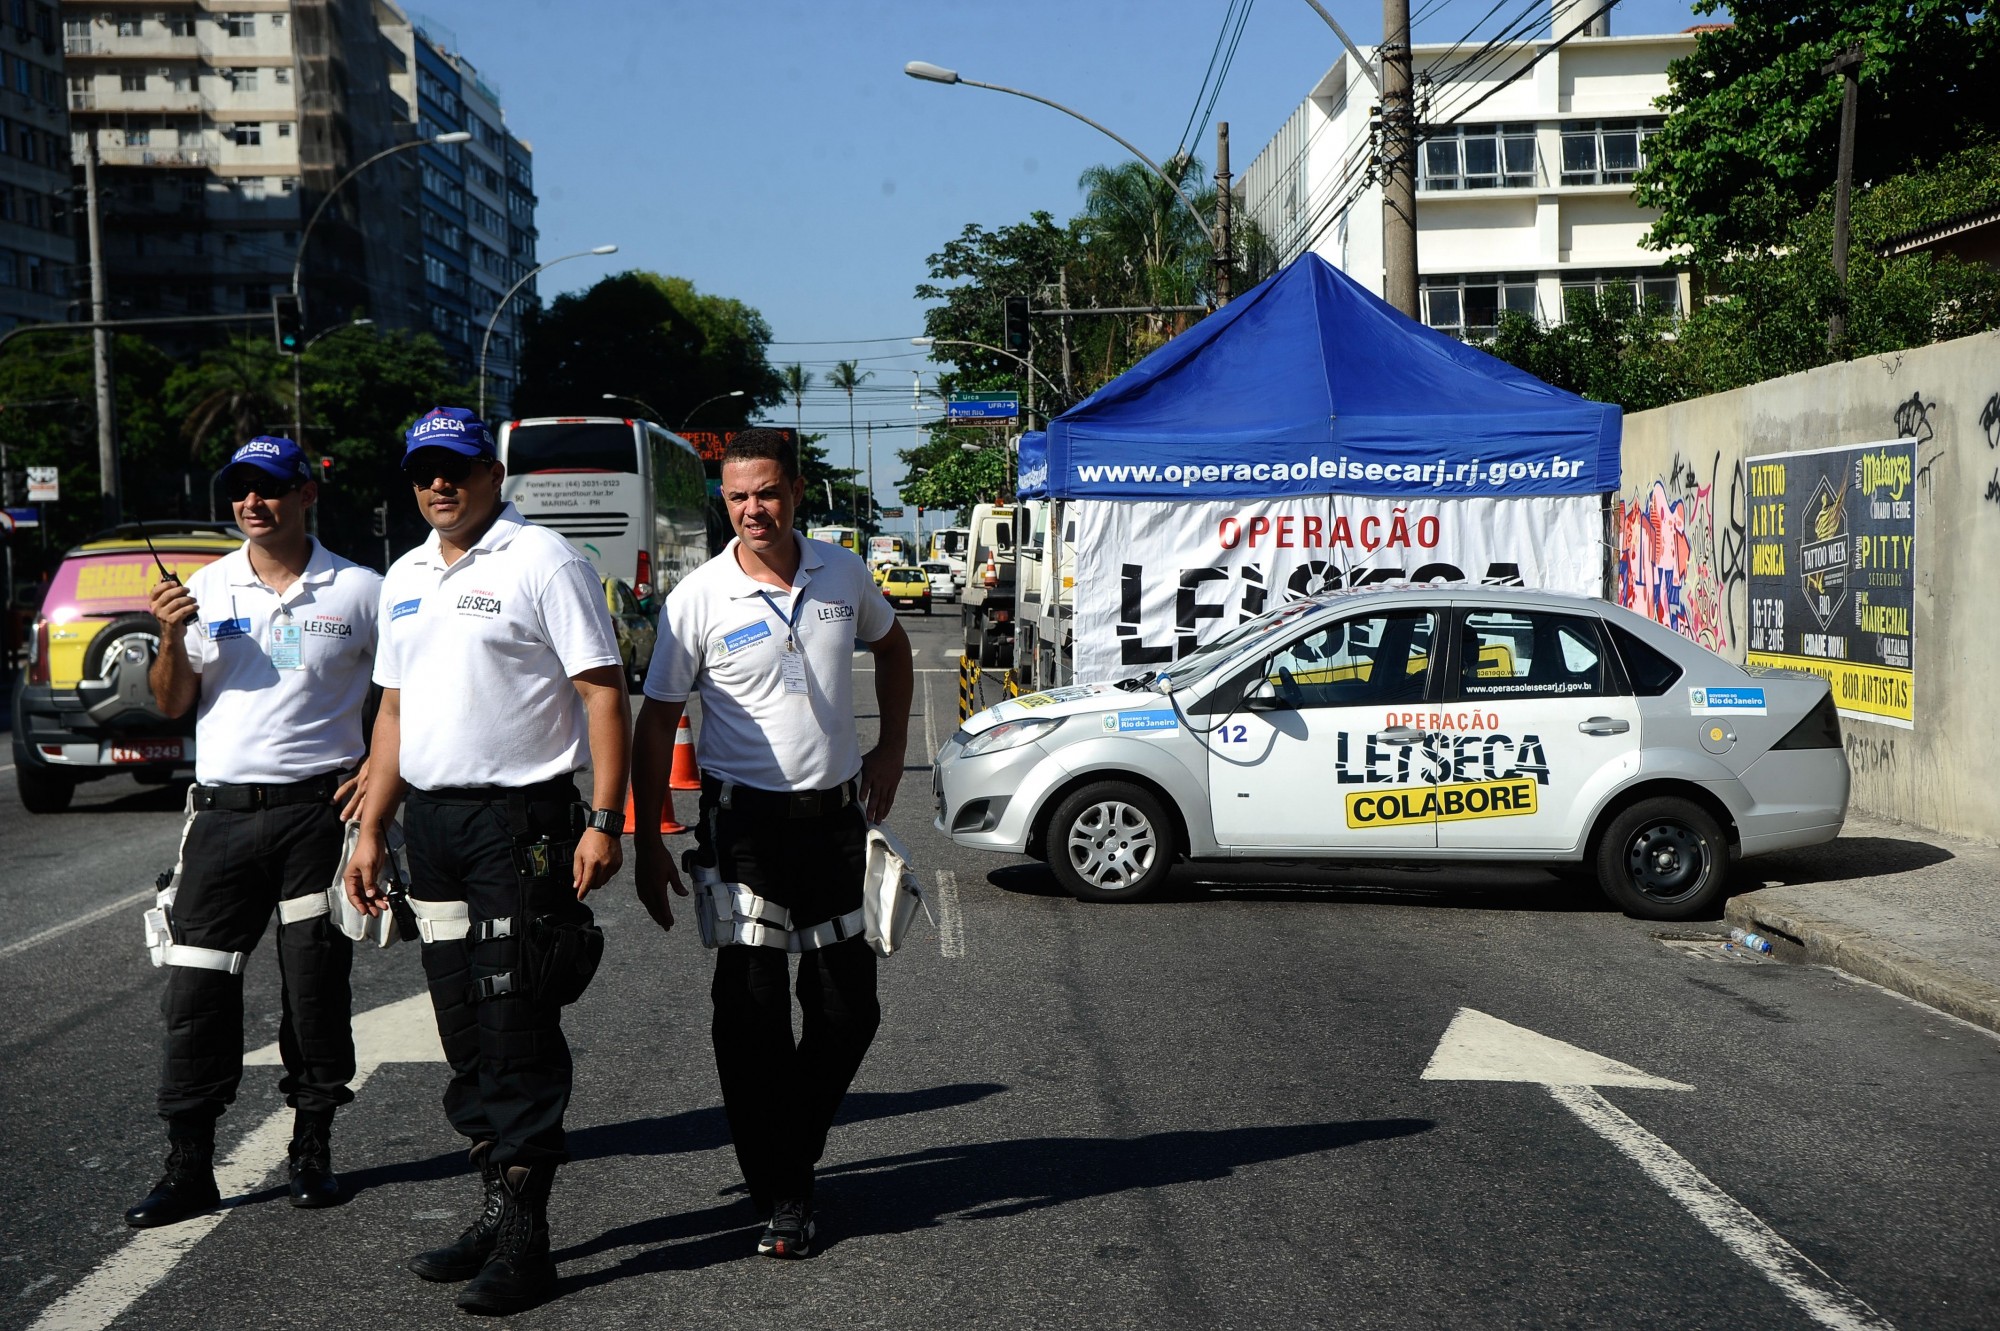 Looting and ‘Lei Seca’ Mark Weekend at Rio’s Beaches